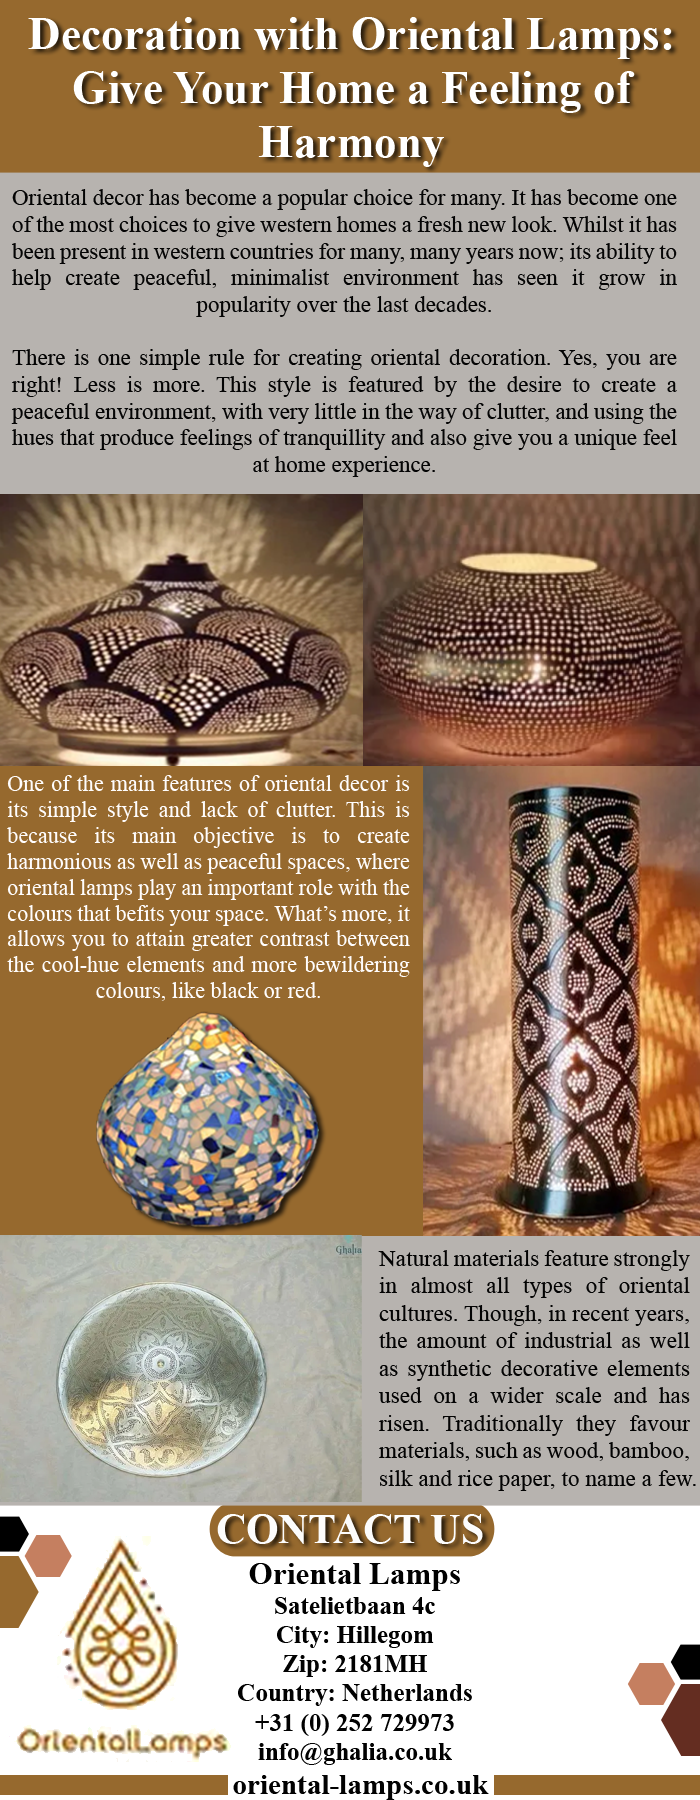 Decoration with Oriental Lamps Give Your Home a Feeling of Harmony.png  by orientallamps